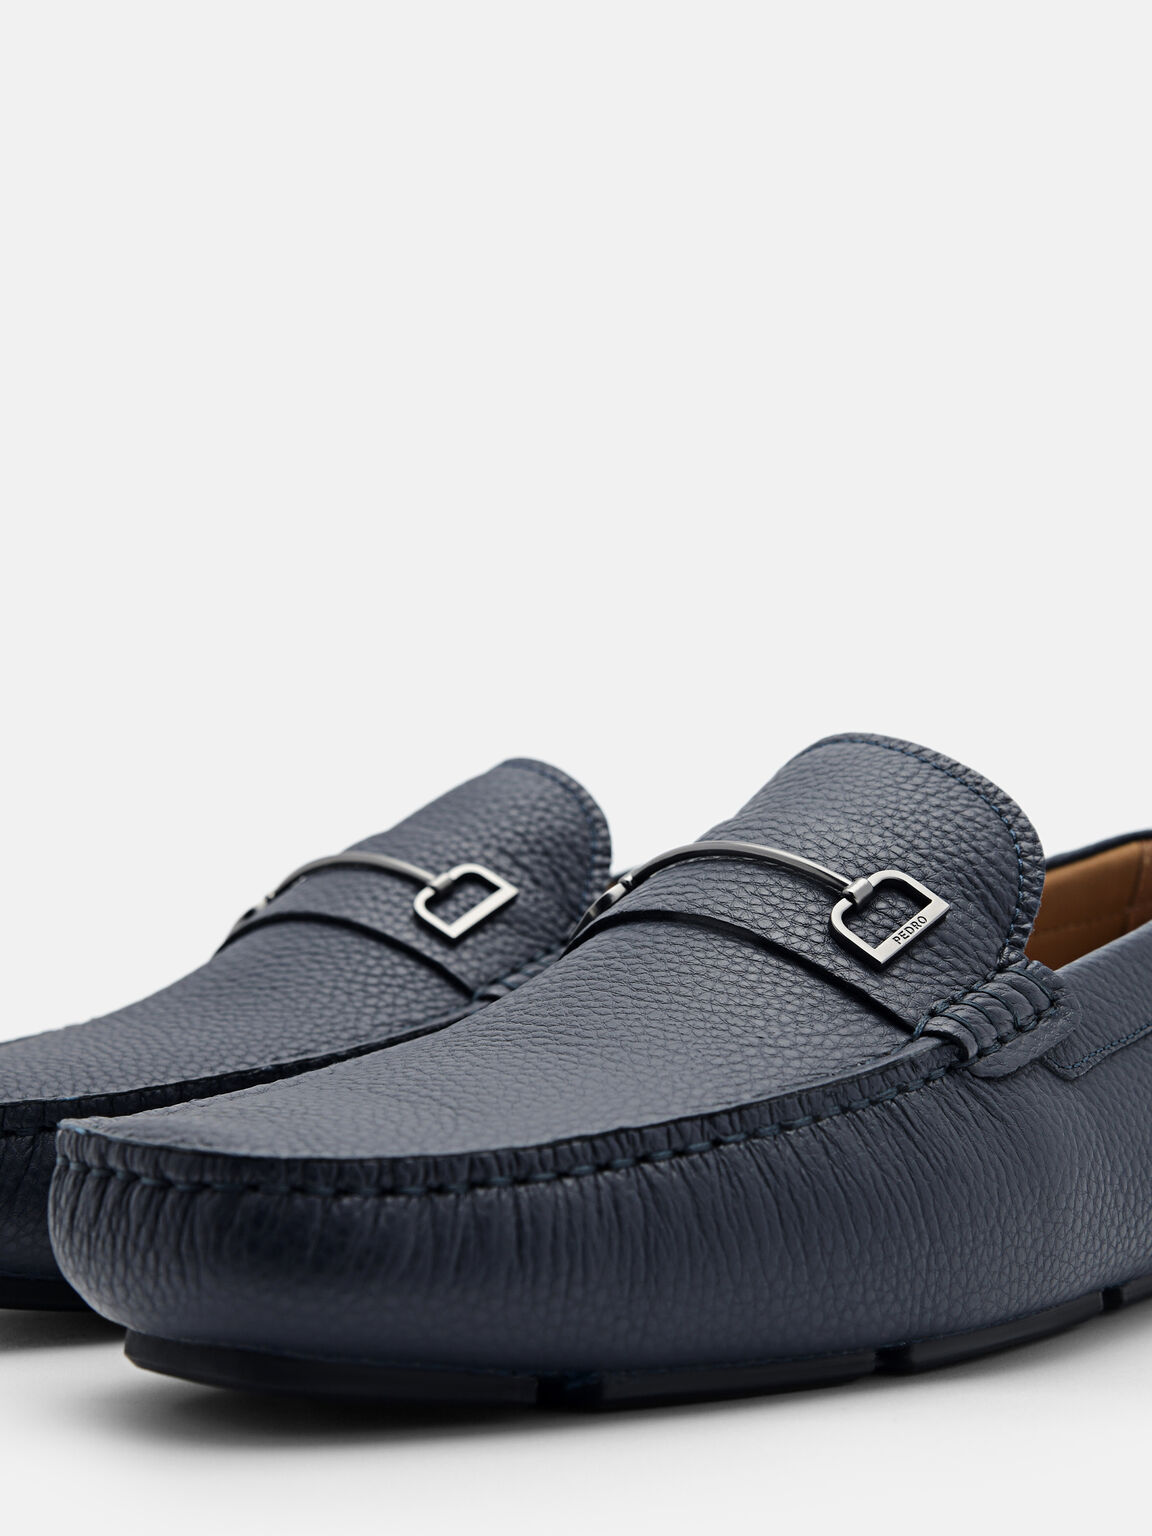 Casey Leather Driving Shoes, Navy, hi-res